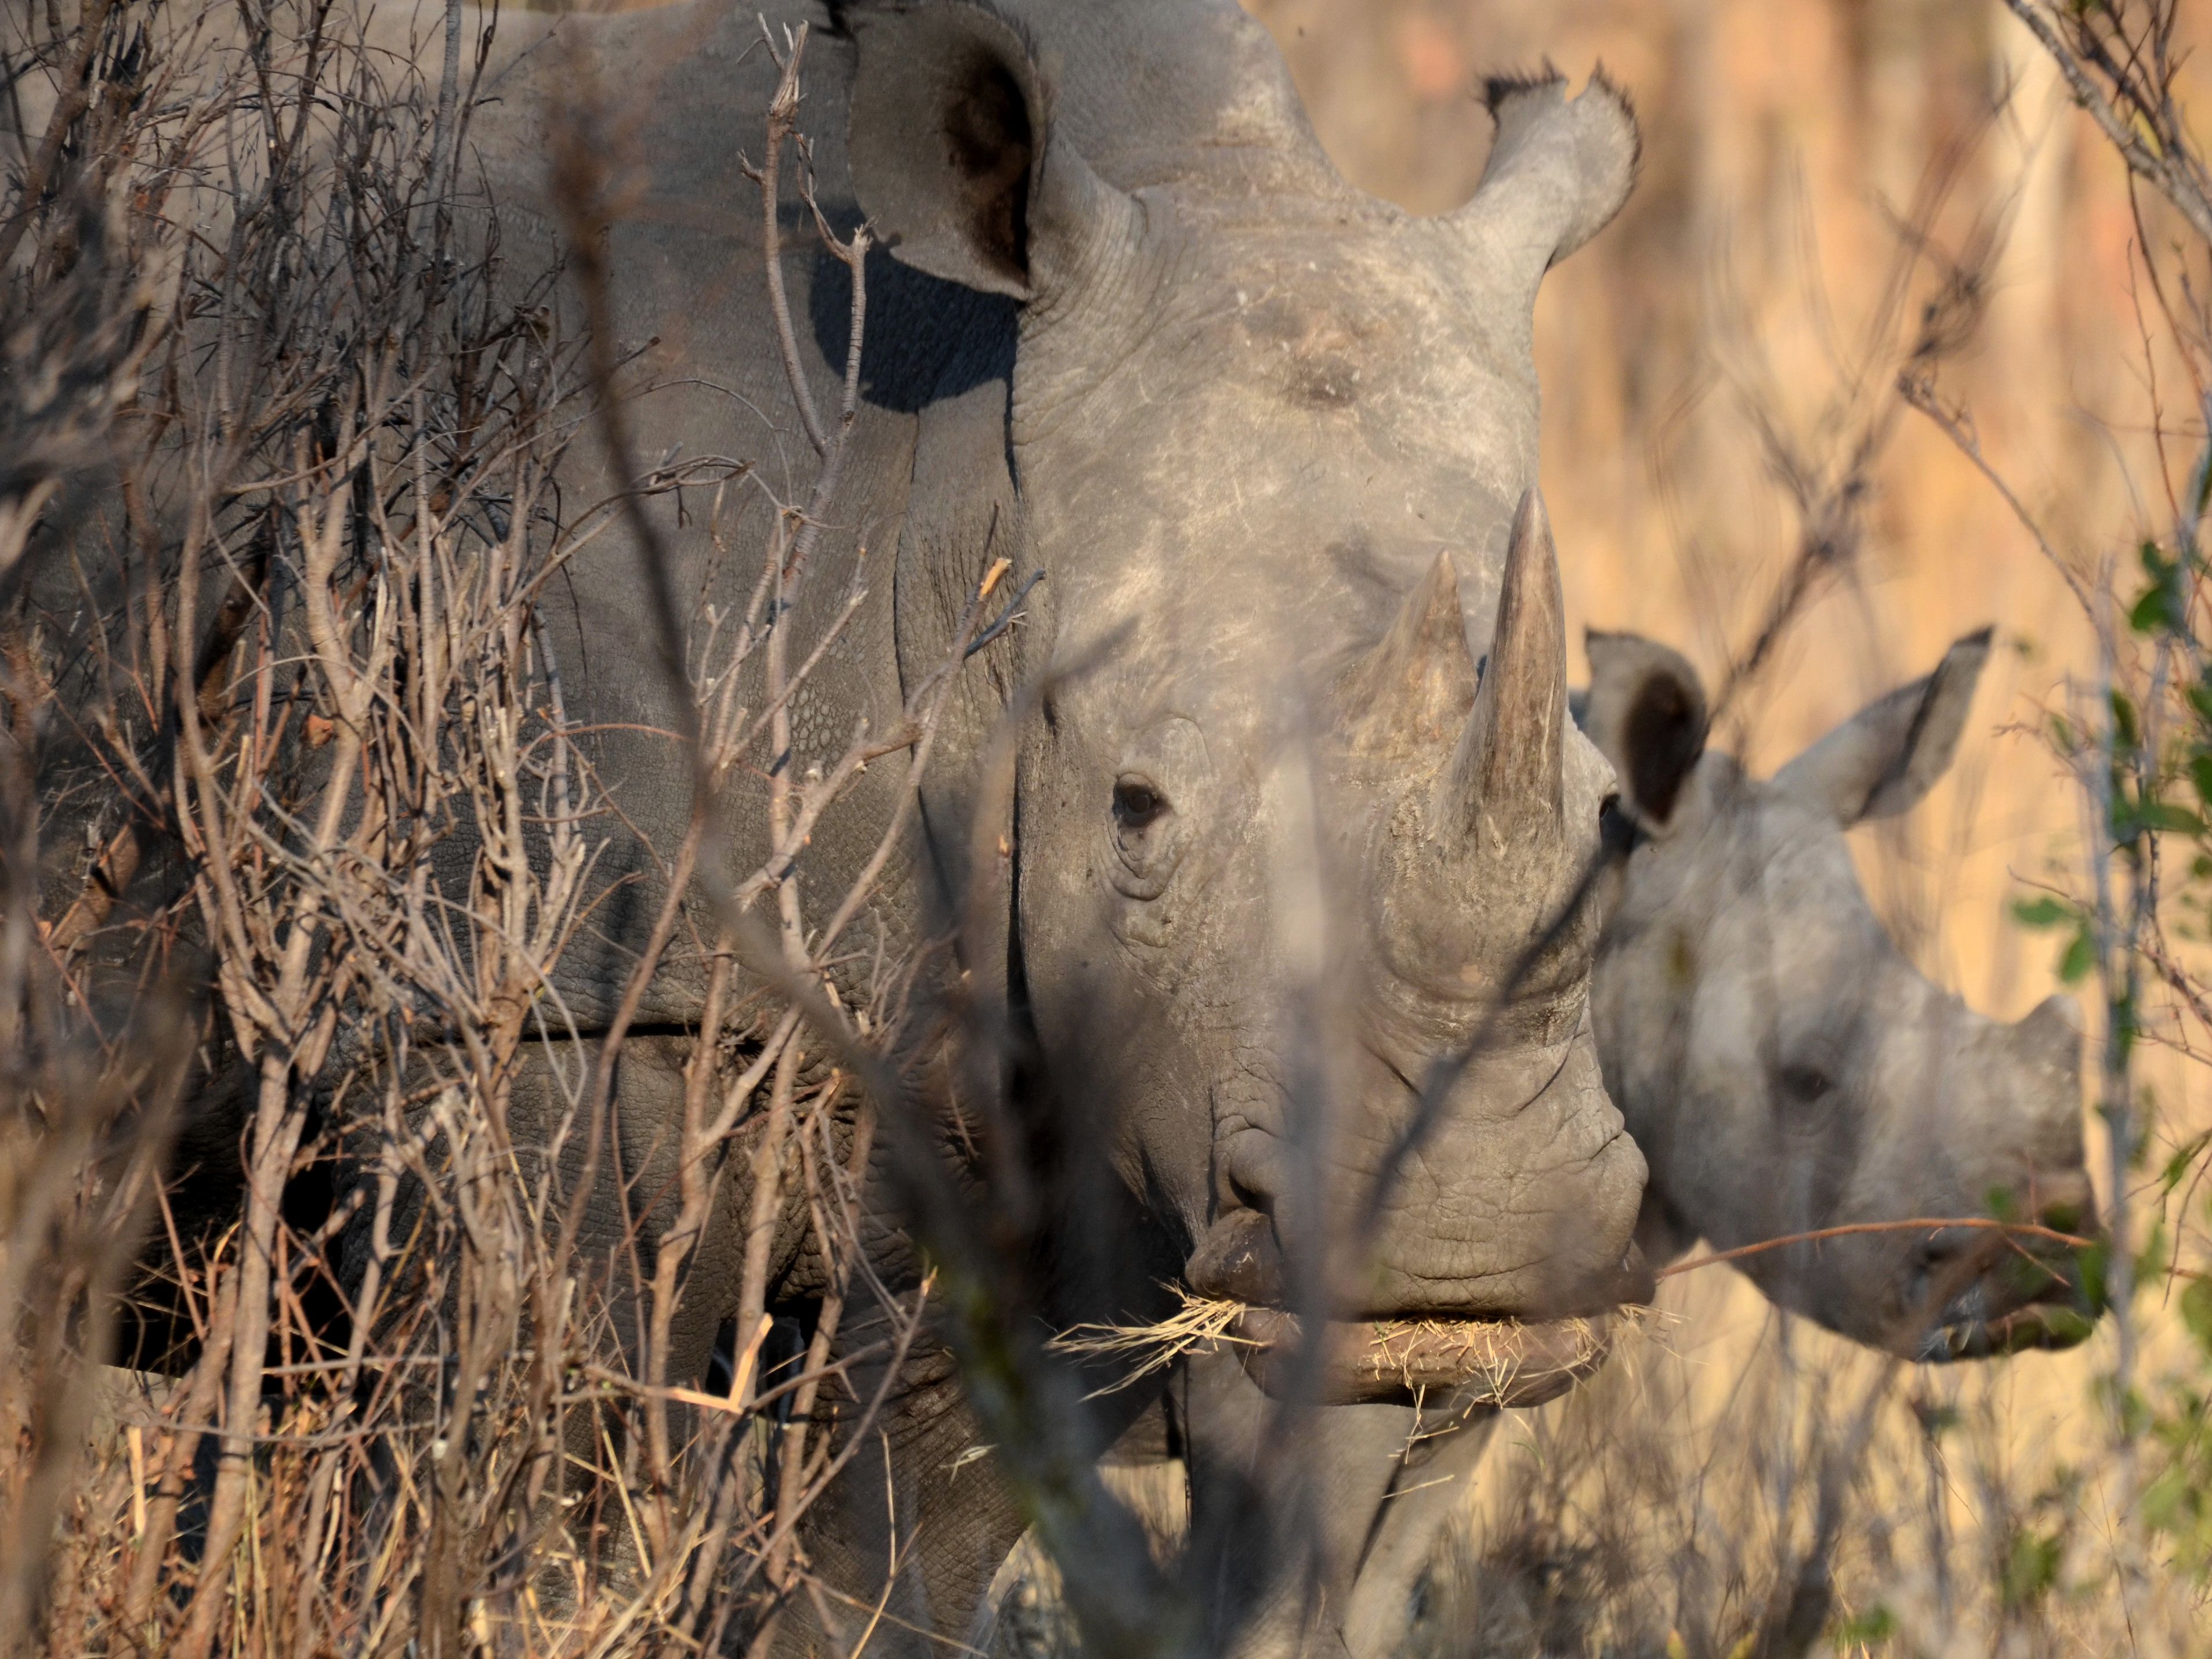 Click picture to see more  White (Square-lipped) Rhinoceroses.